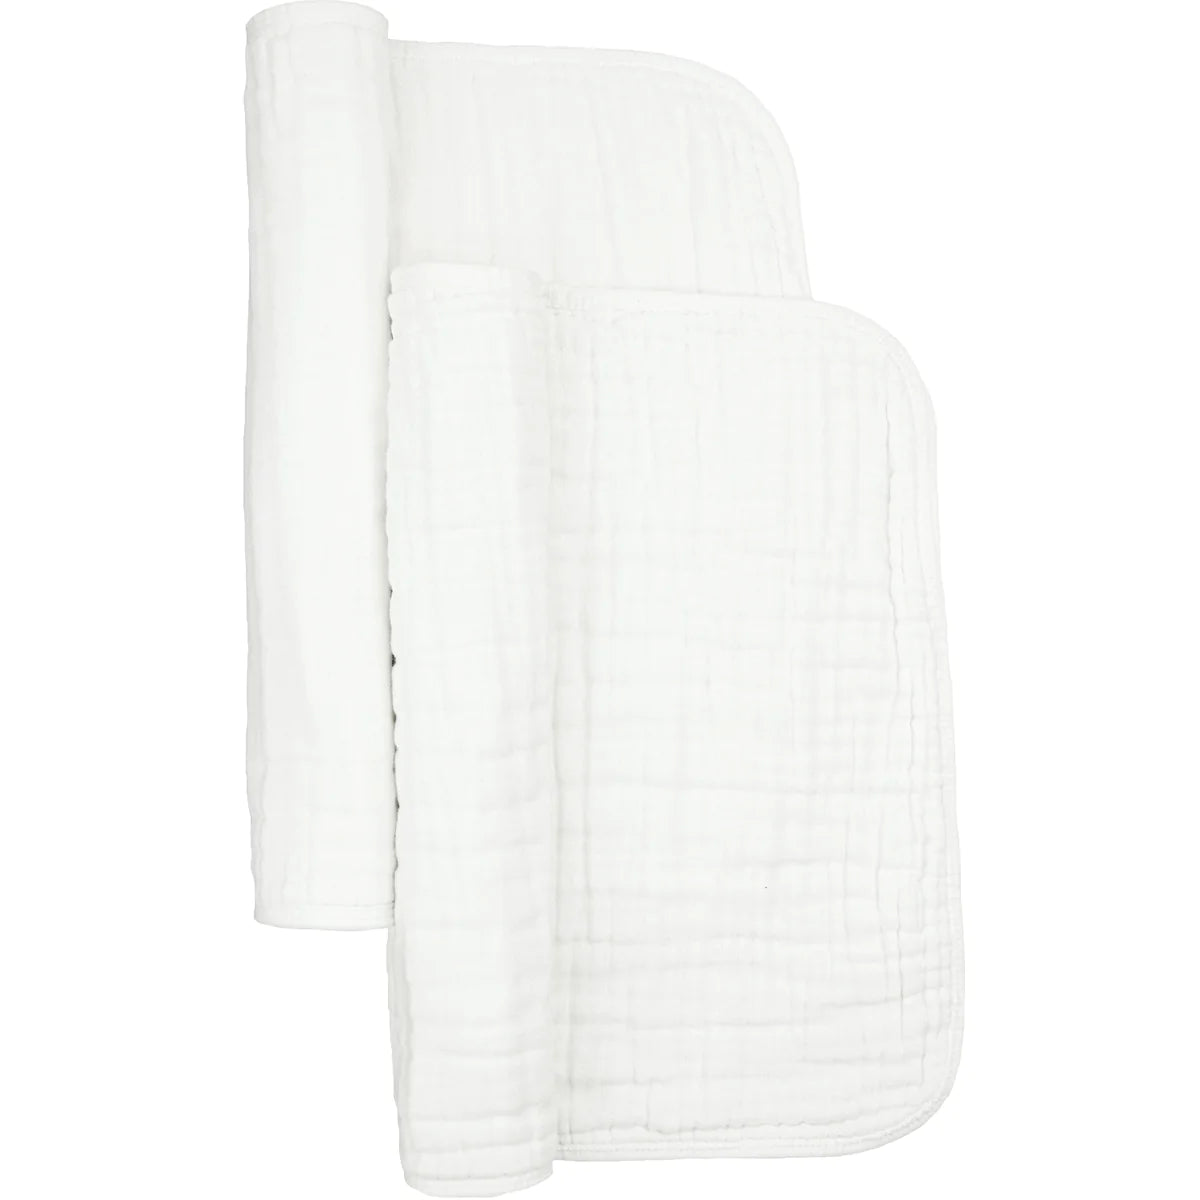 2-pack Small Muslin Cloths - White/cars - Home All